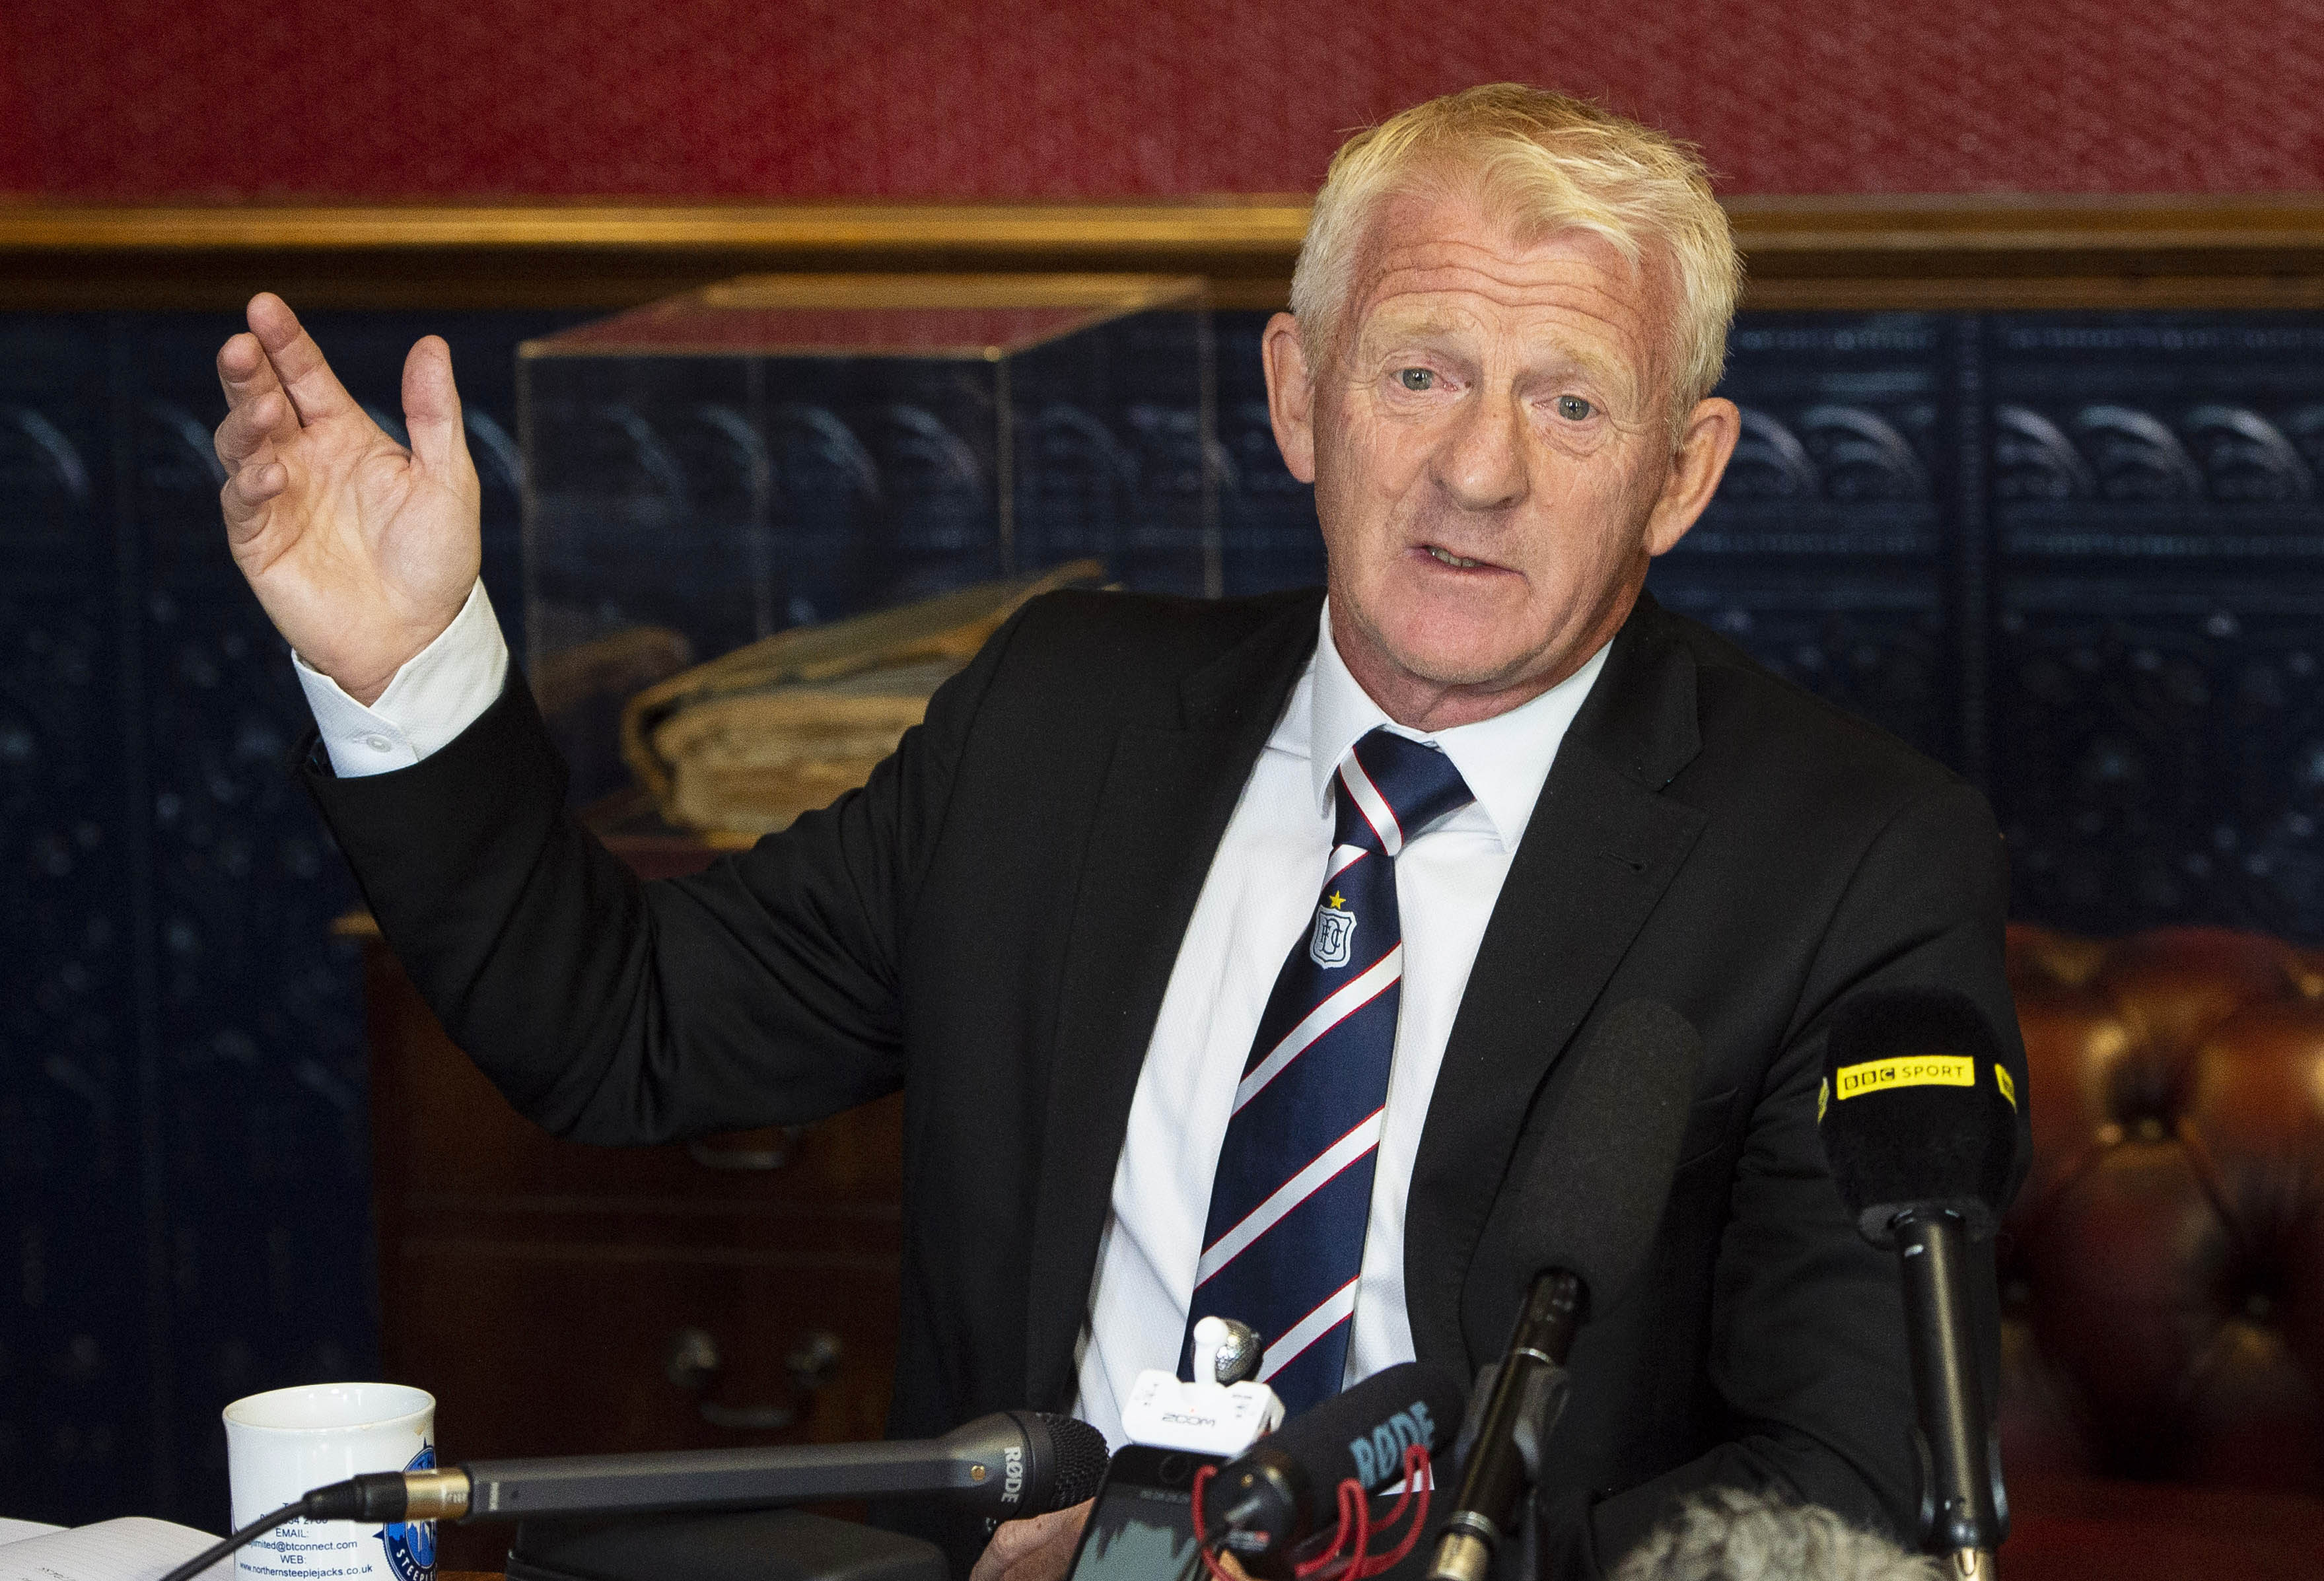 Gordon Strachan is passionate about youth football in Scotland